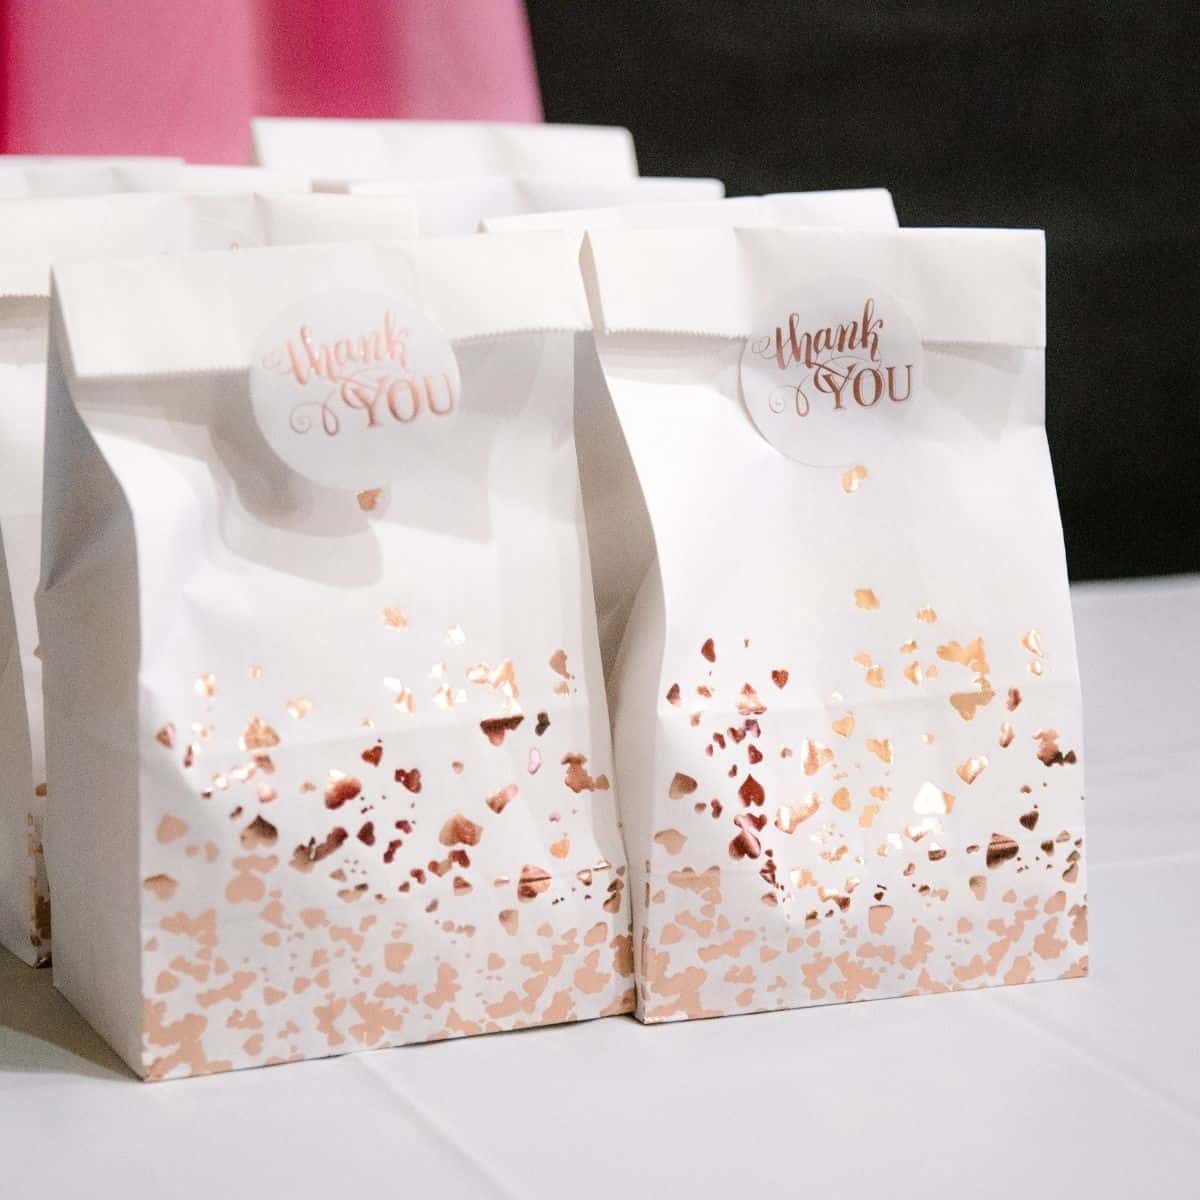 Fun and Memorable Party Favors for a Sweet 16 Celebration